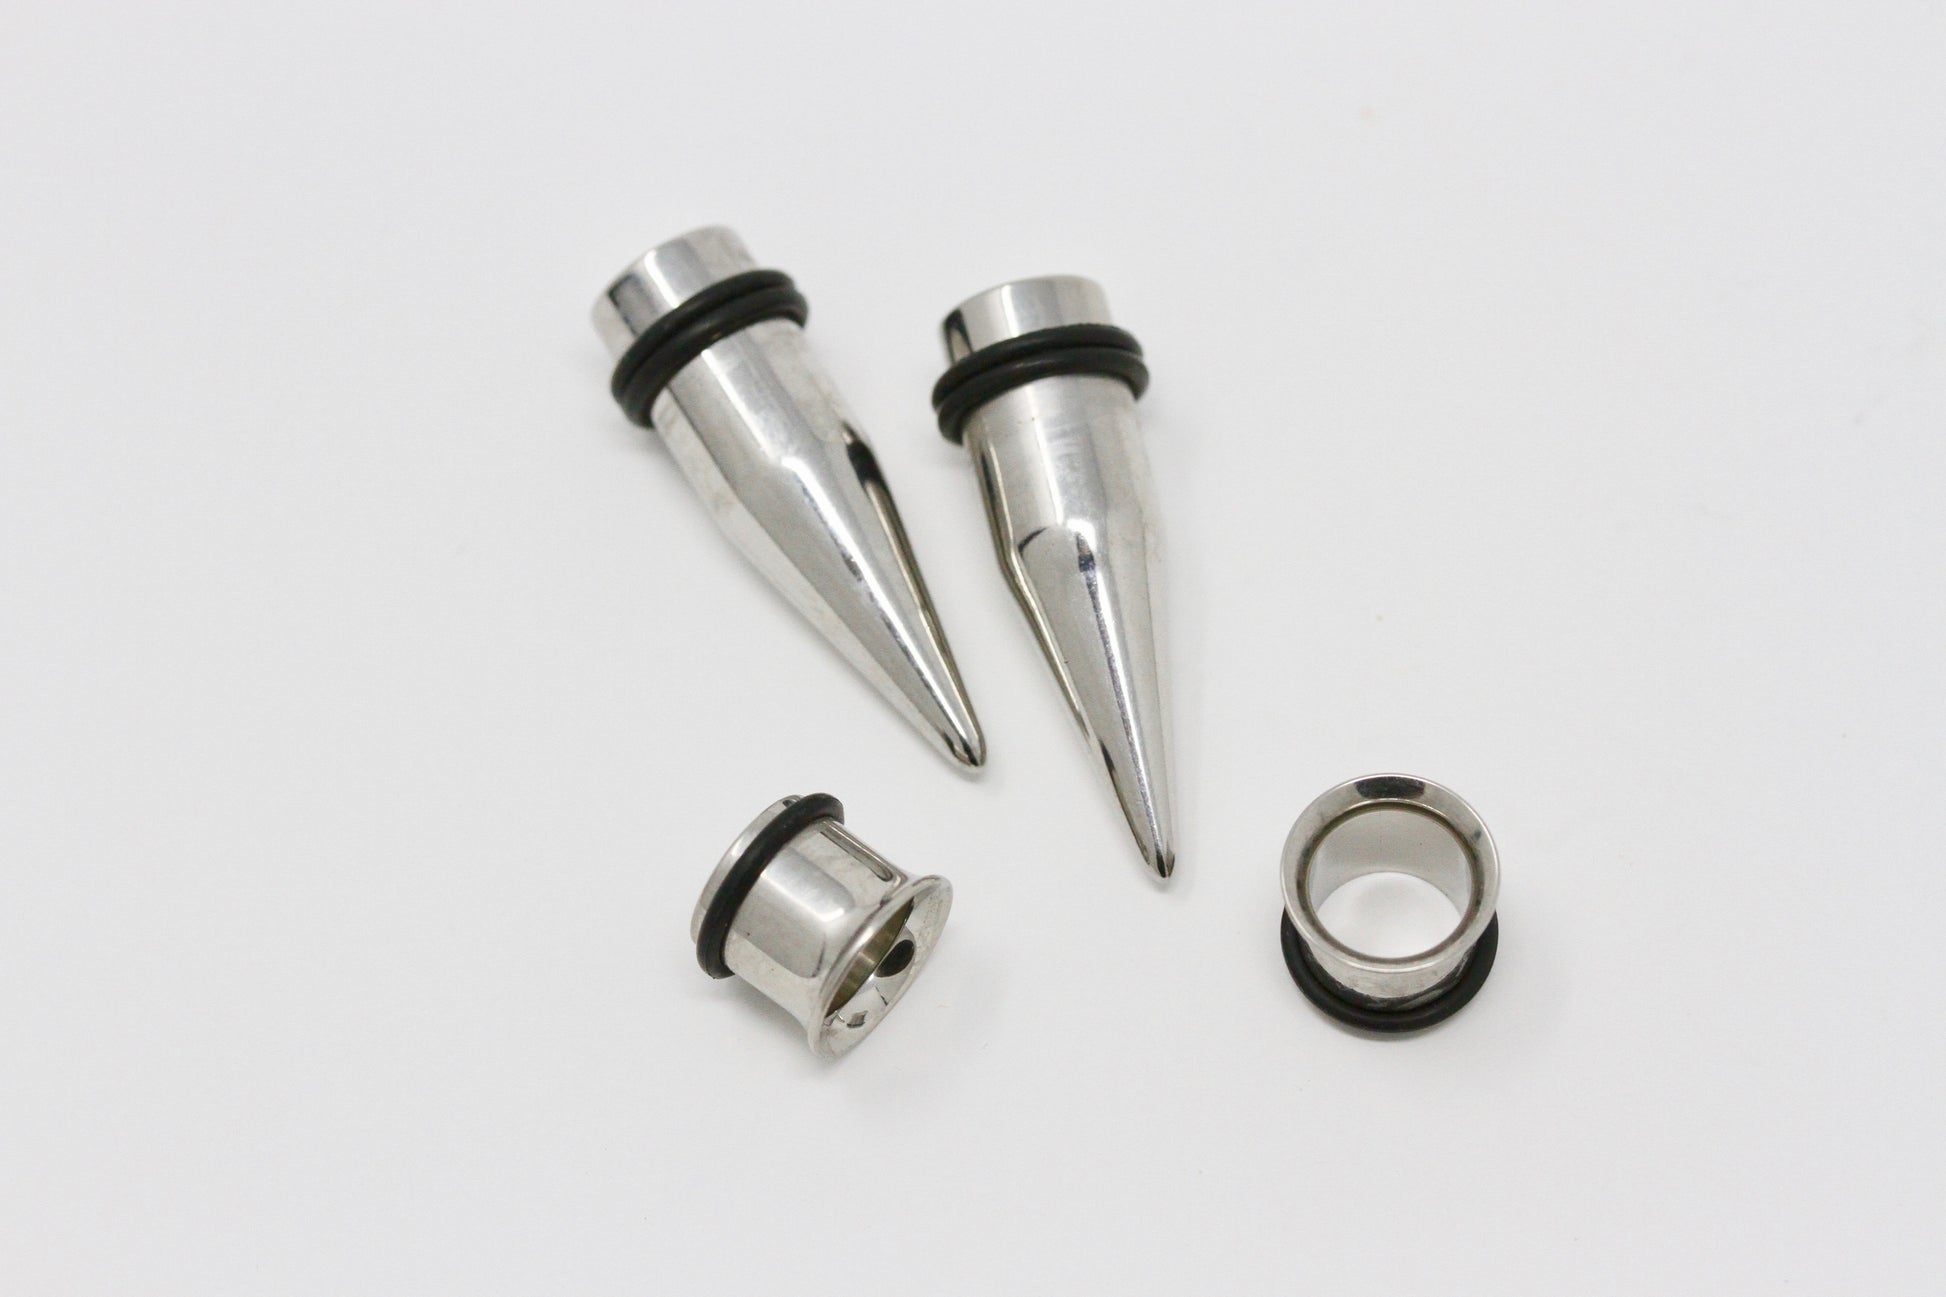 Ear Stretching Kit - Stainless Steel - PSS001 – Two Feather Plugs